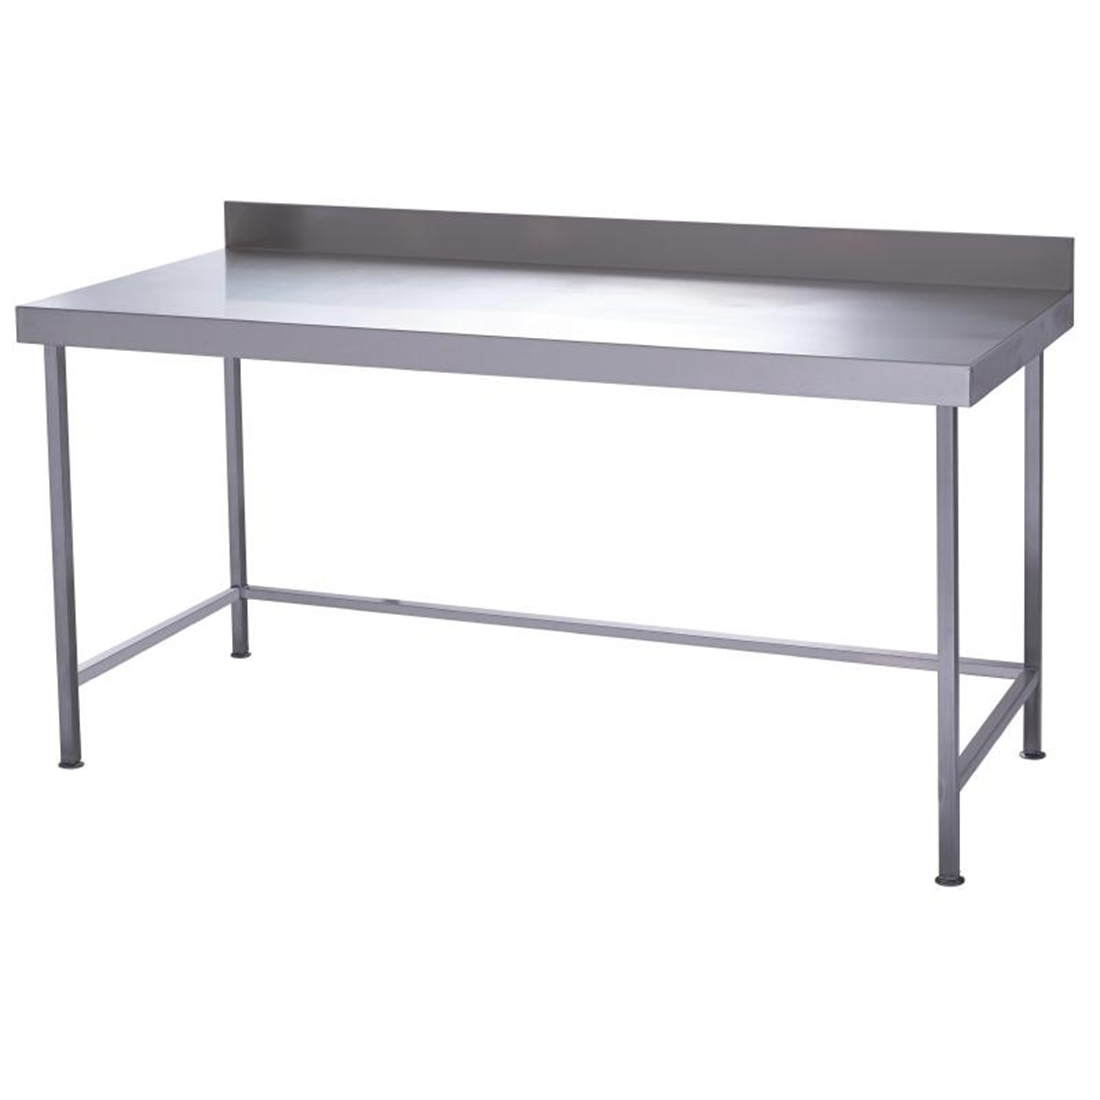 Parry Fully Welded Stainless Steel Wall Table 1000x600mm